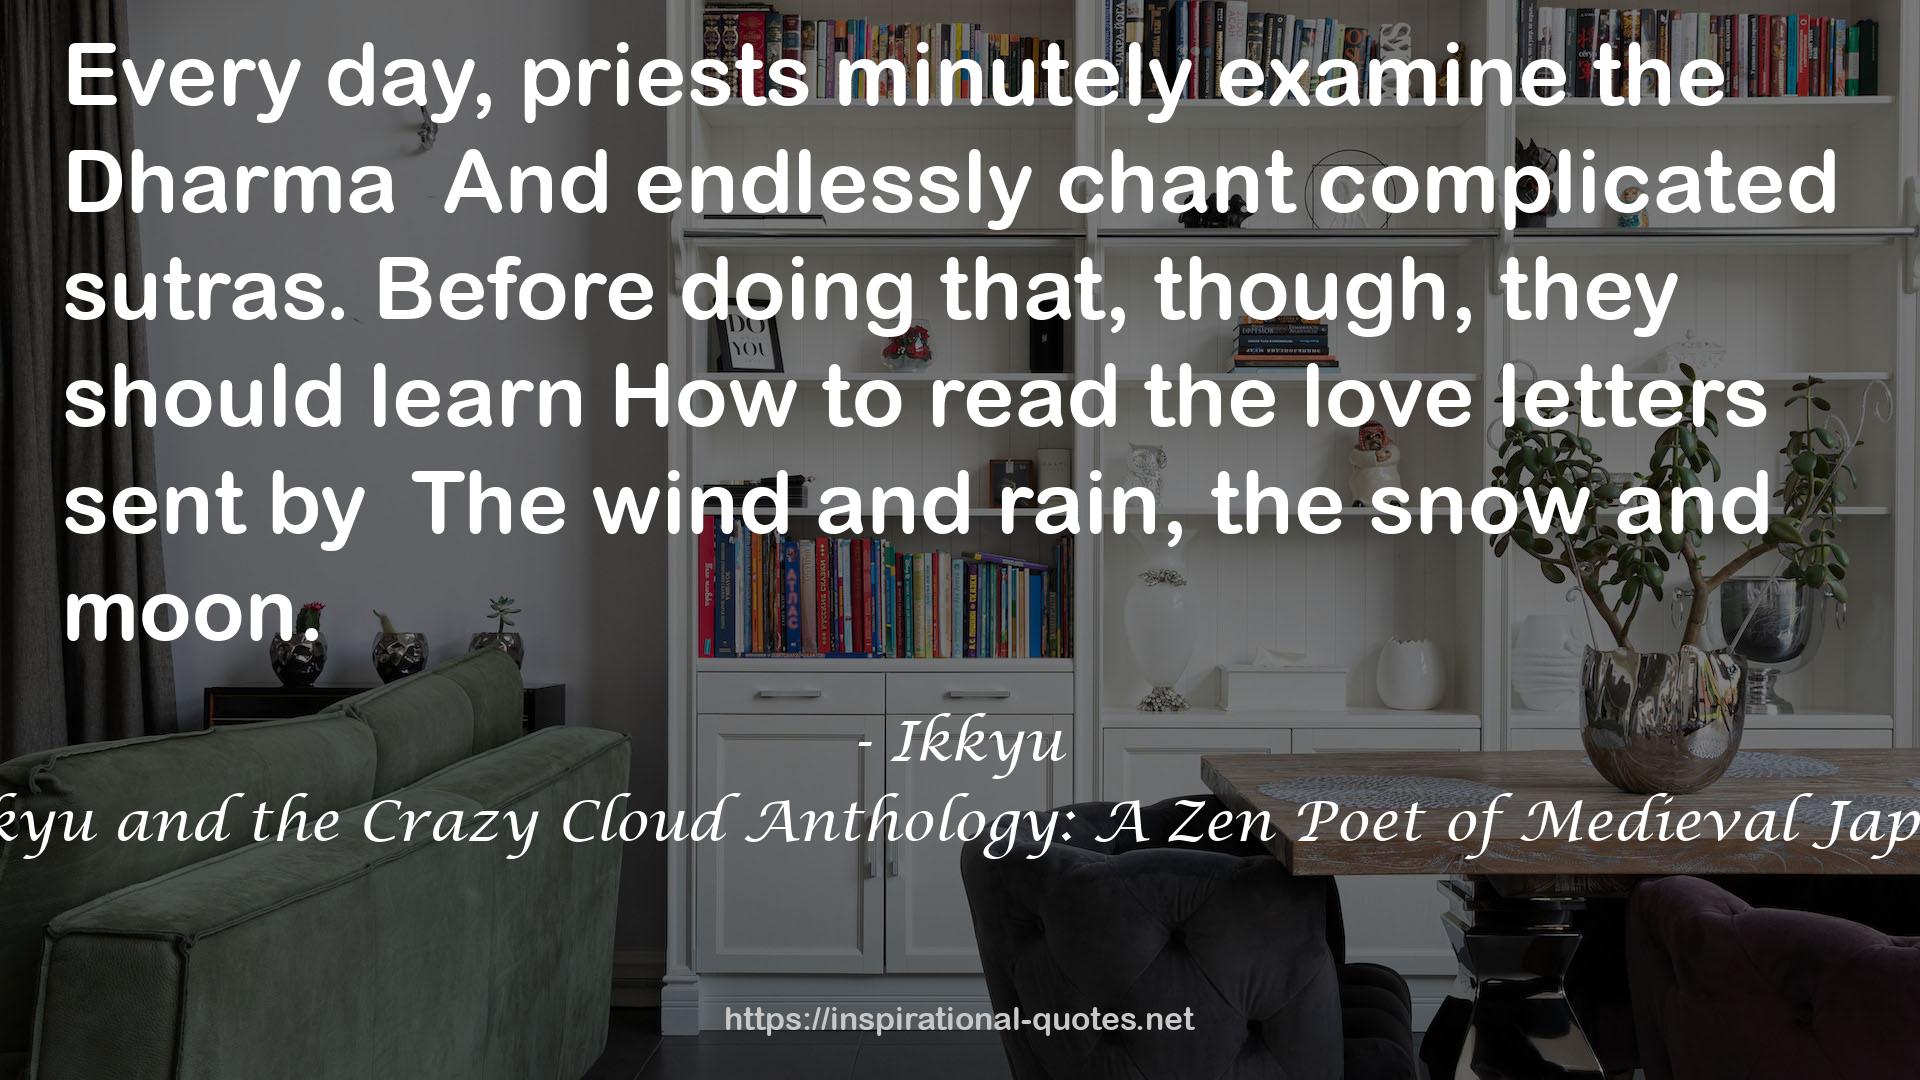 Ikkyu and the Crazy Cloud Anthology: A Zen Poet of Medieval Japan QUOTES